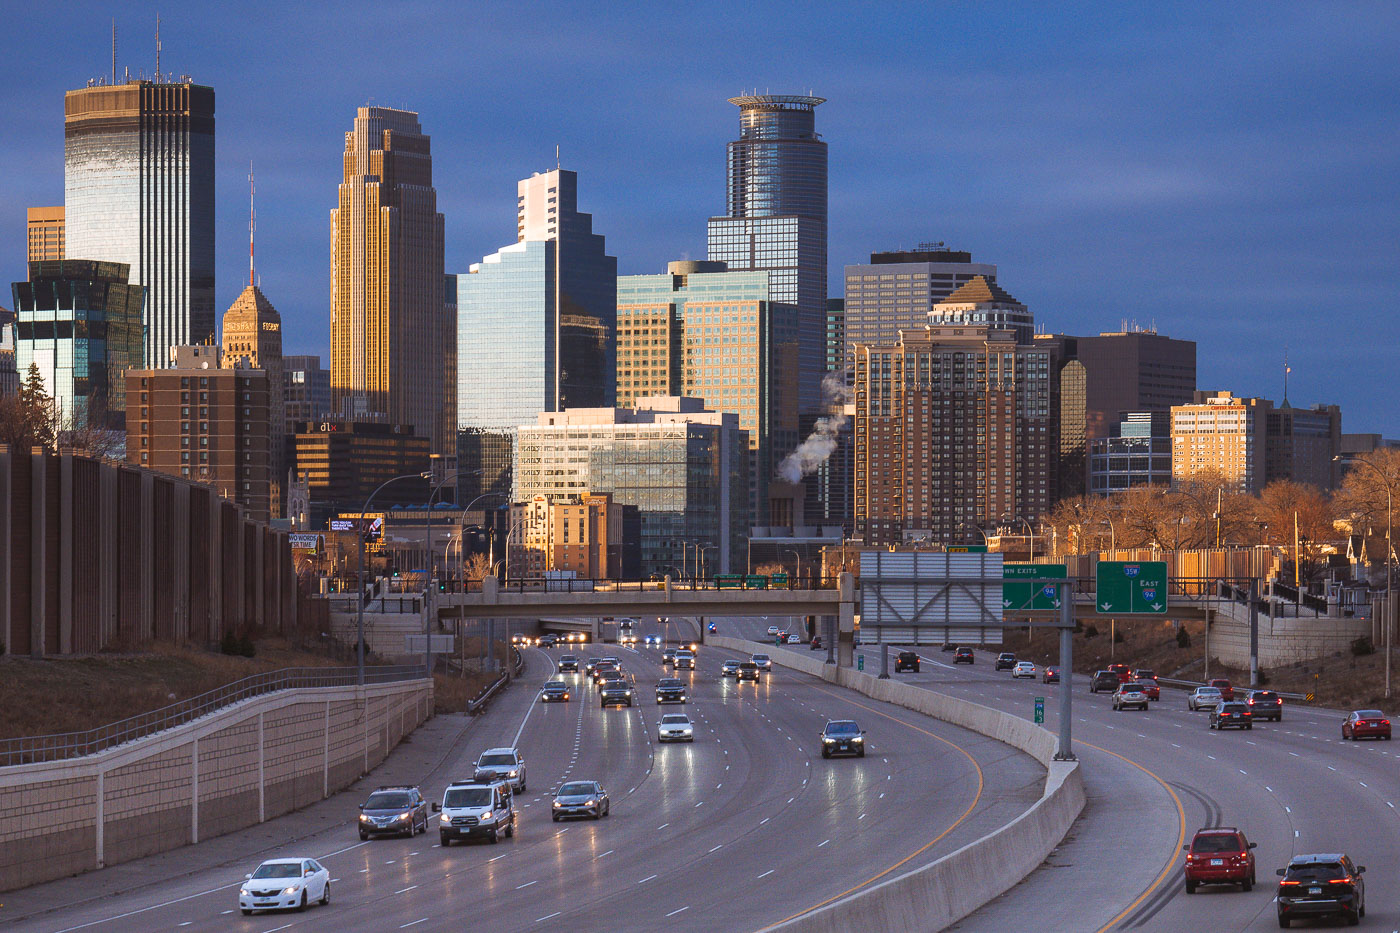 Cars on the interstate and downtown skyline